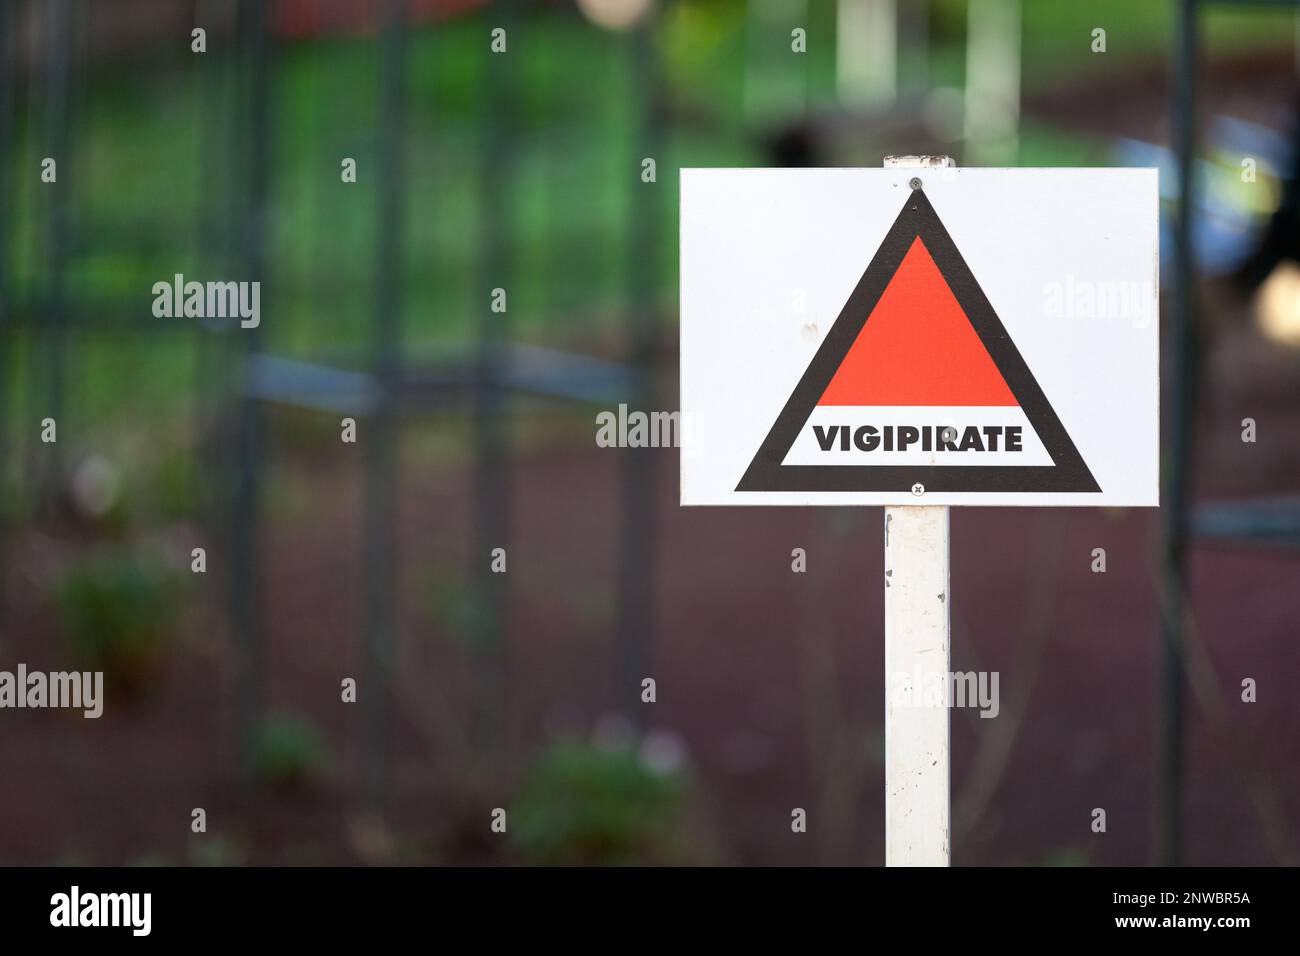 Triangular sign outside a school for the Vigipirate plan, the France's national security alert system against terrorist threats. Stock Photo